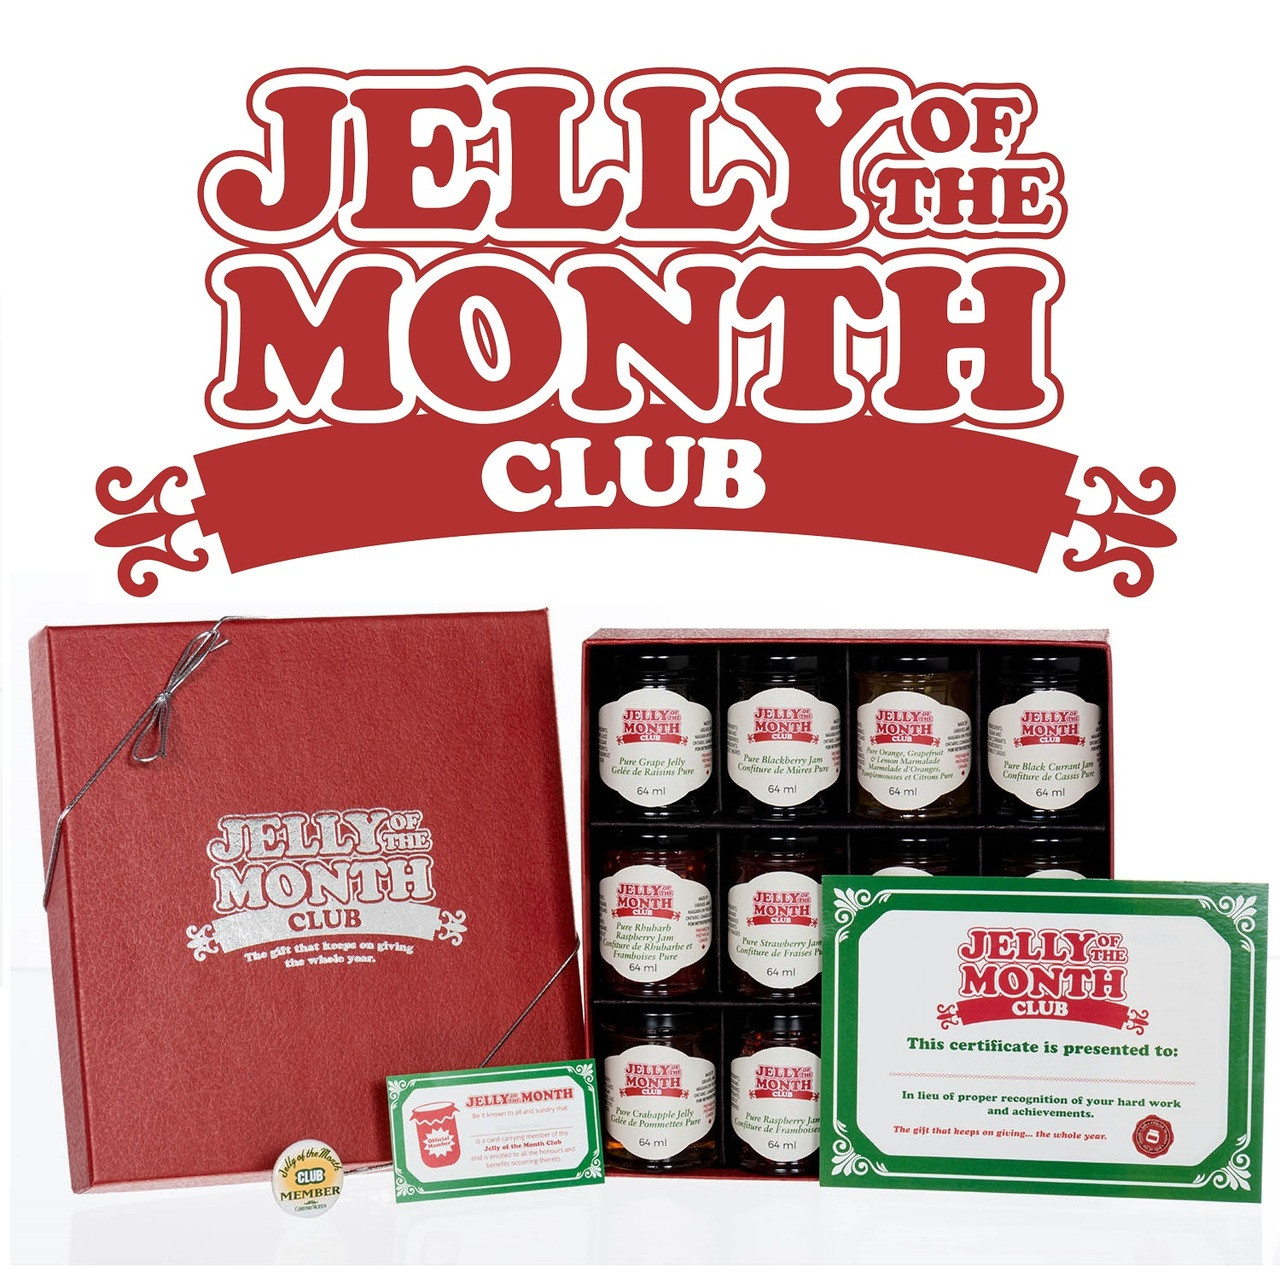 Griswold_Vacation_Jelly_of_the_Month_Club_2017__63840.1510247543.jpg